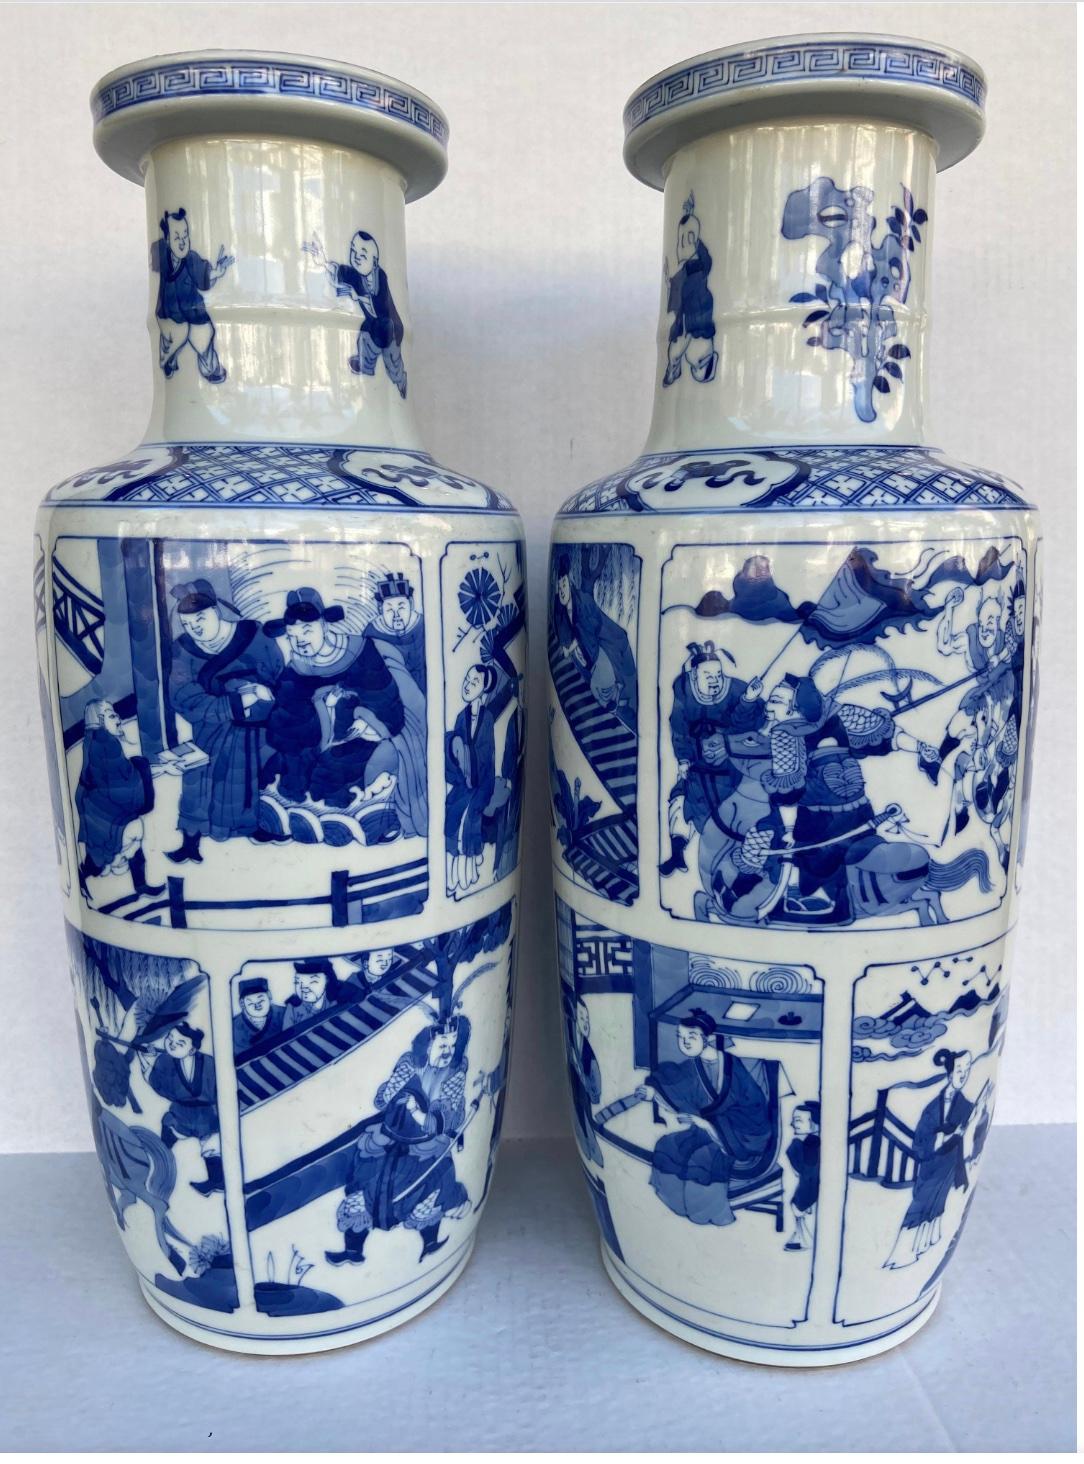 Hand-Crafted This Pair of Blue and White Porcelain Vases, Circa 1850 Qing Dynasty